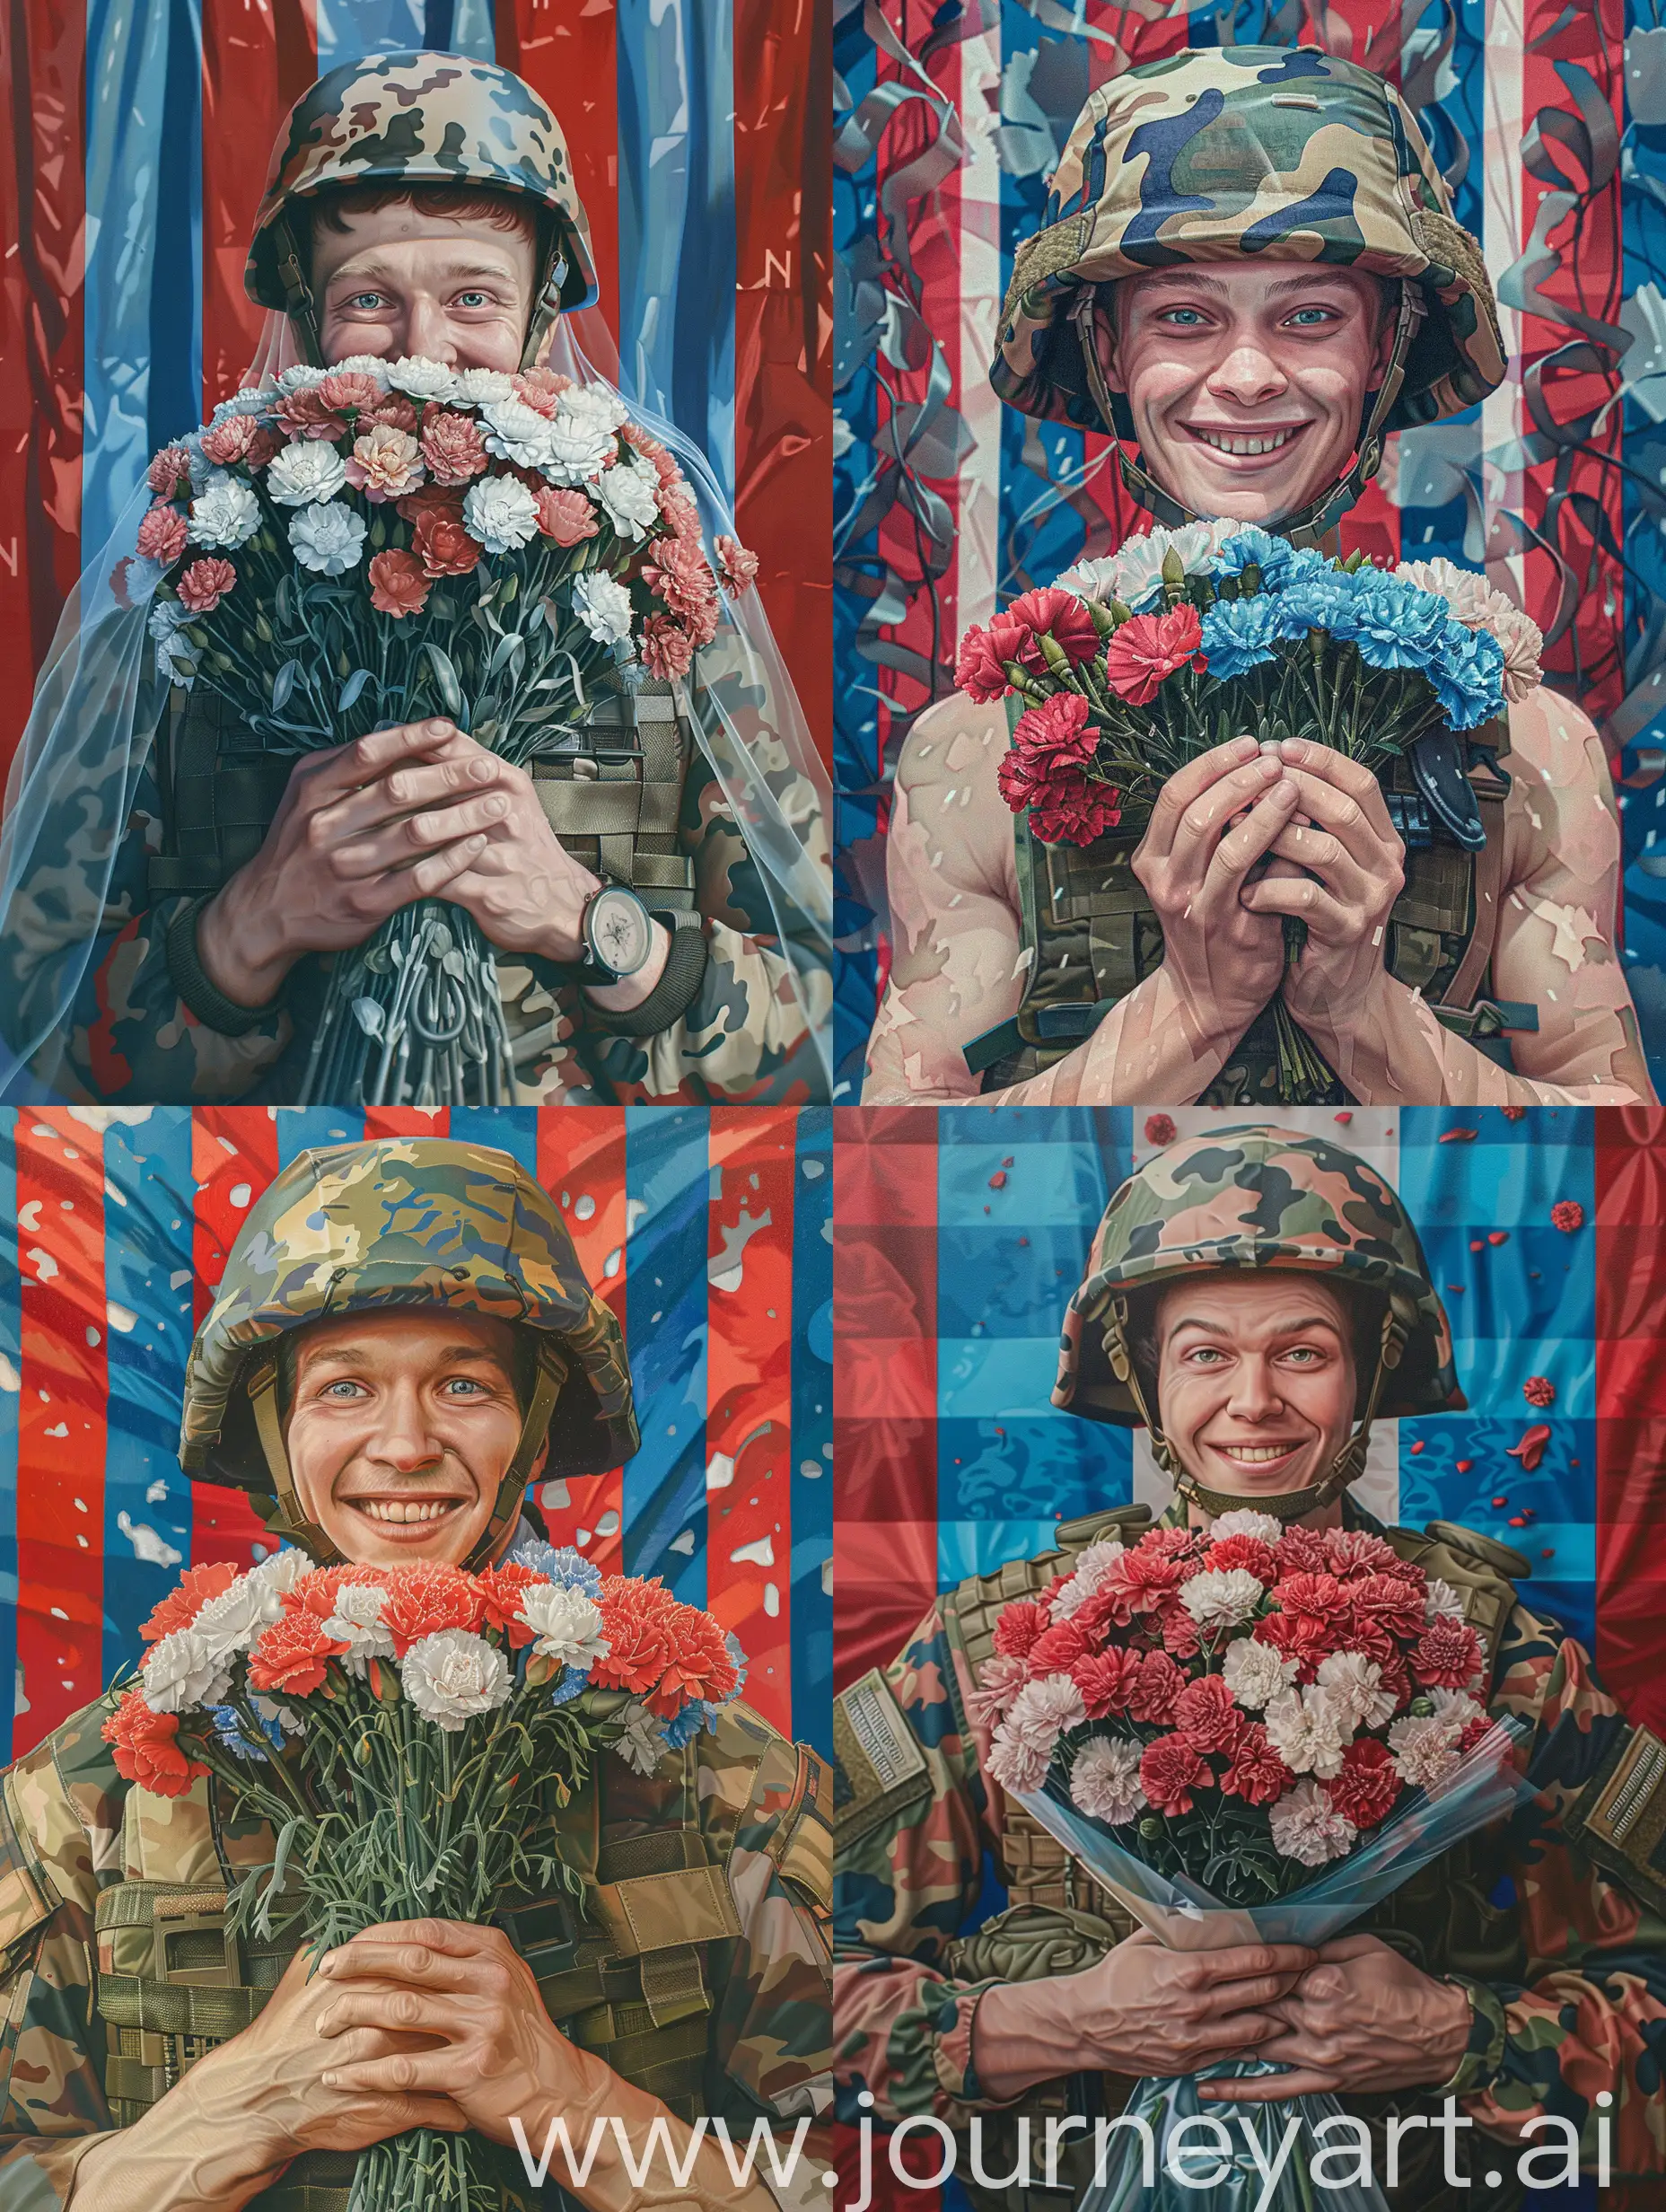 Courageous-Russian-Soldier-Holding-a-Bouquet-of-Carnations-in-Patriotic-Setting